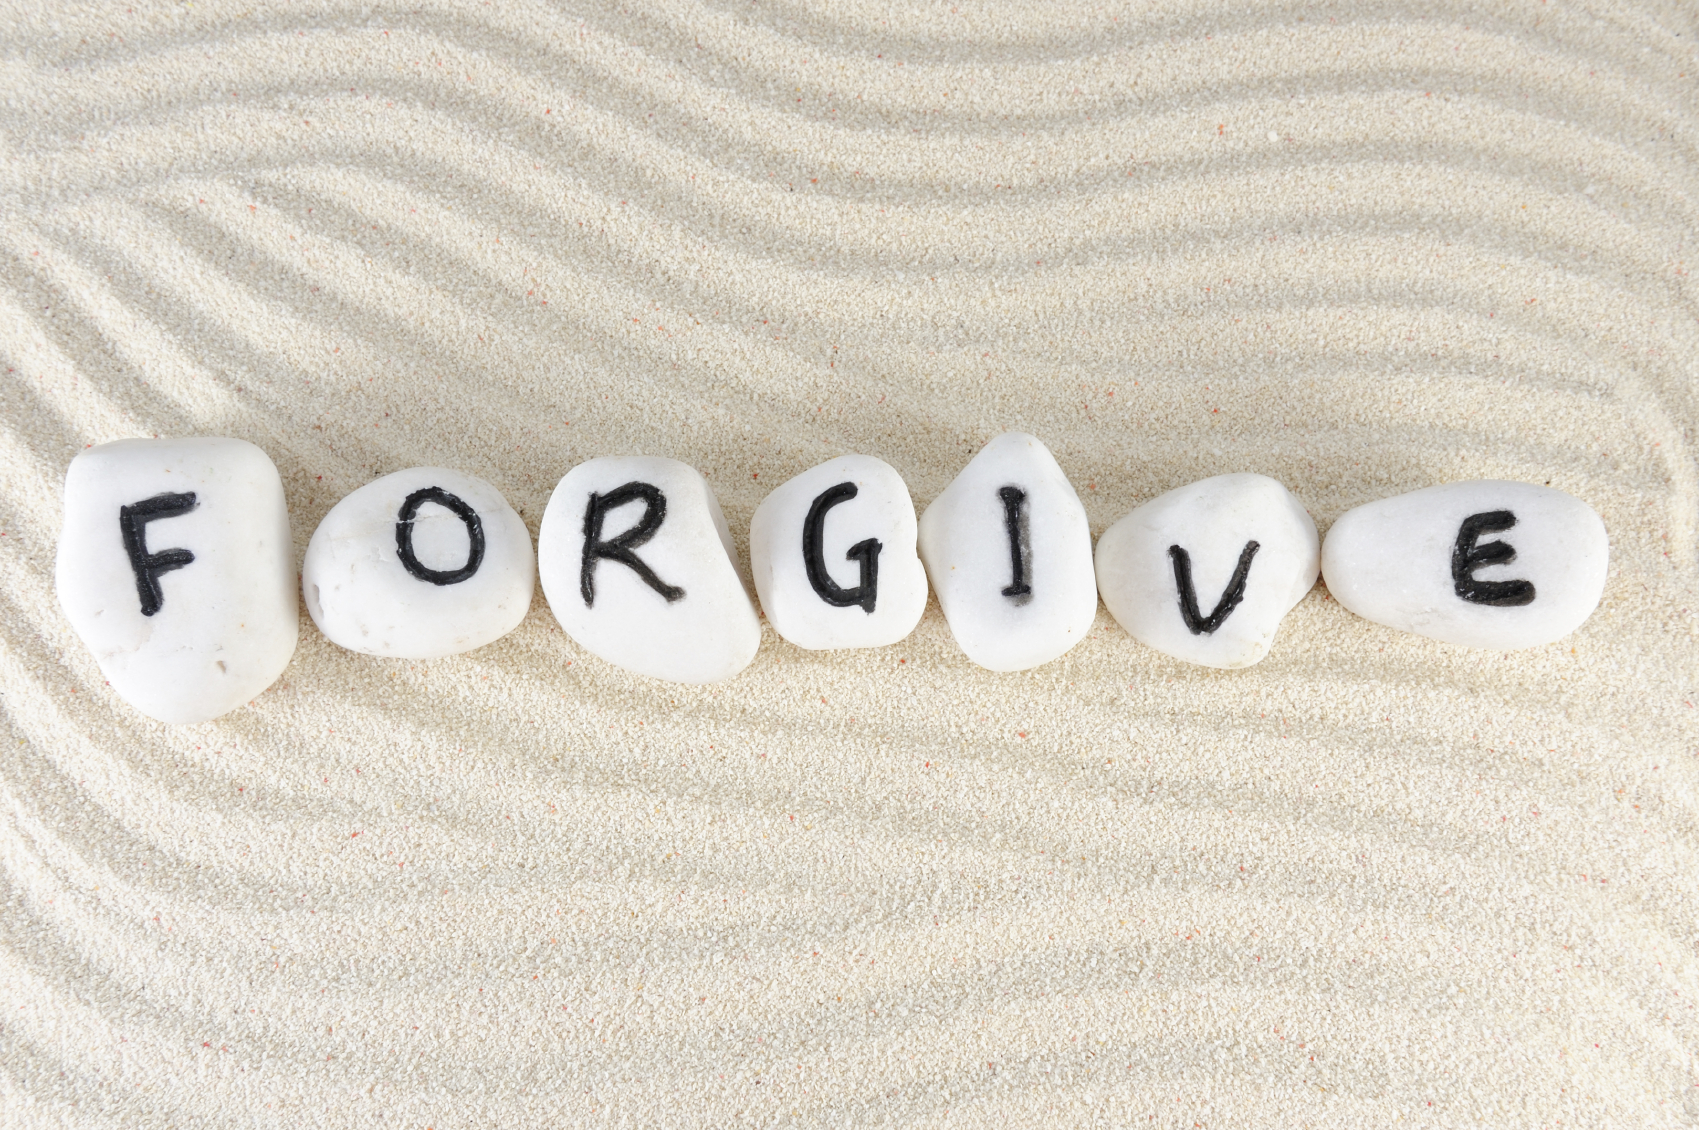 When We Forgive